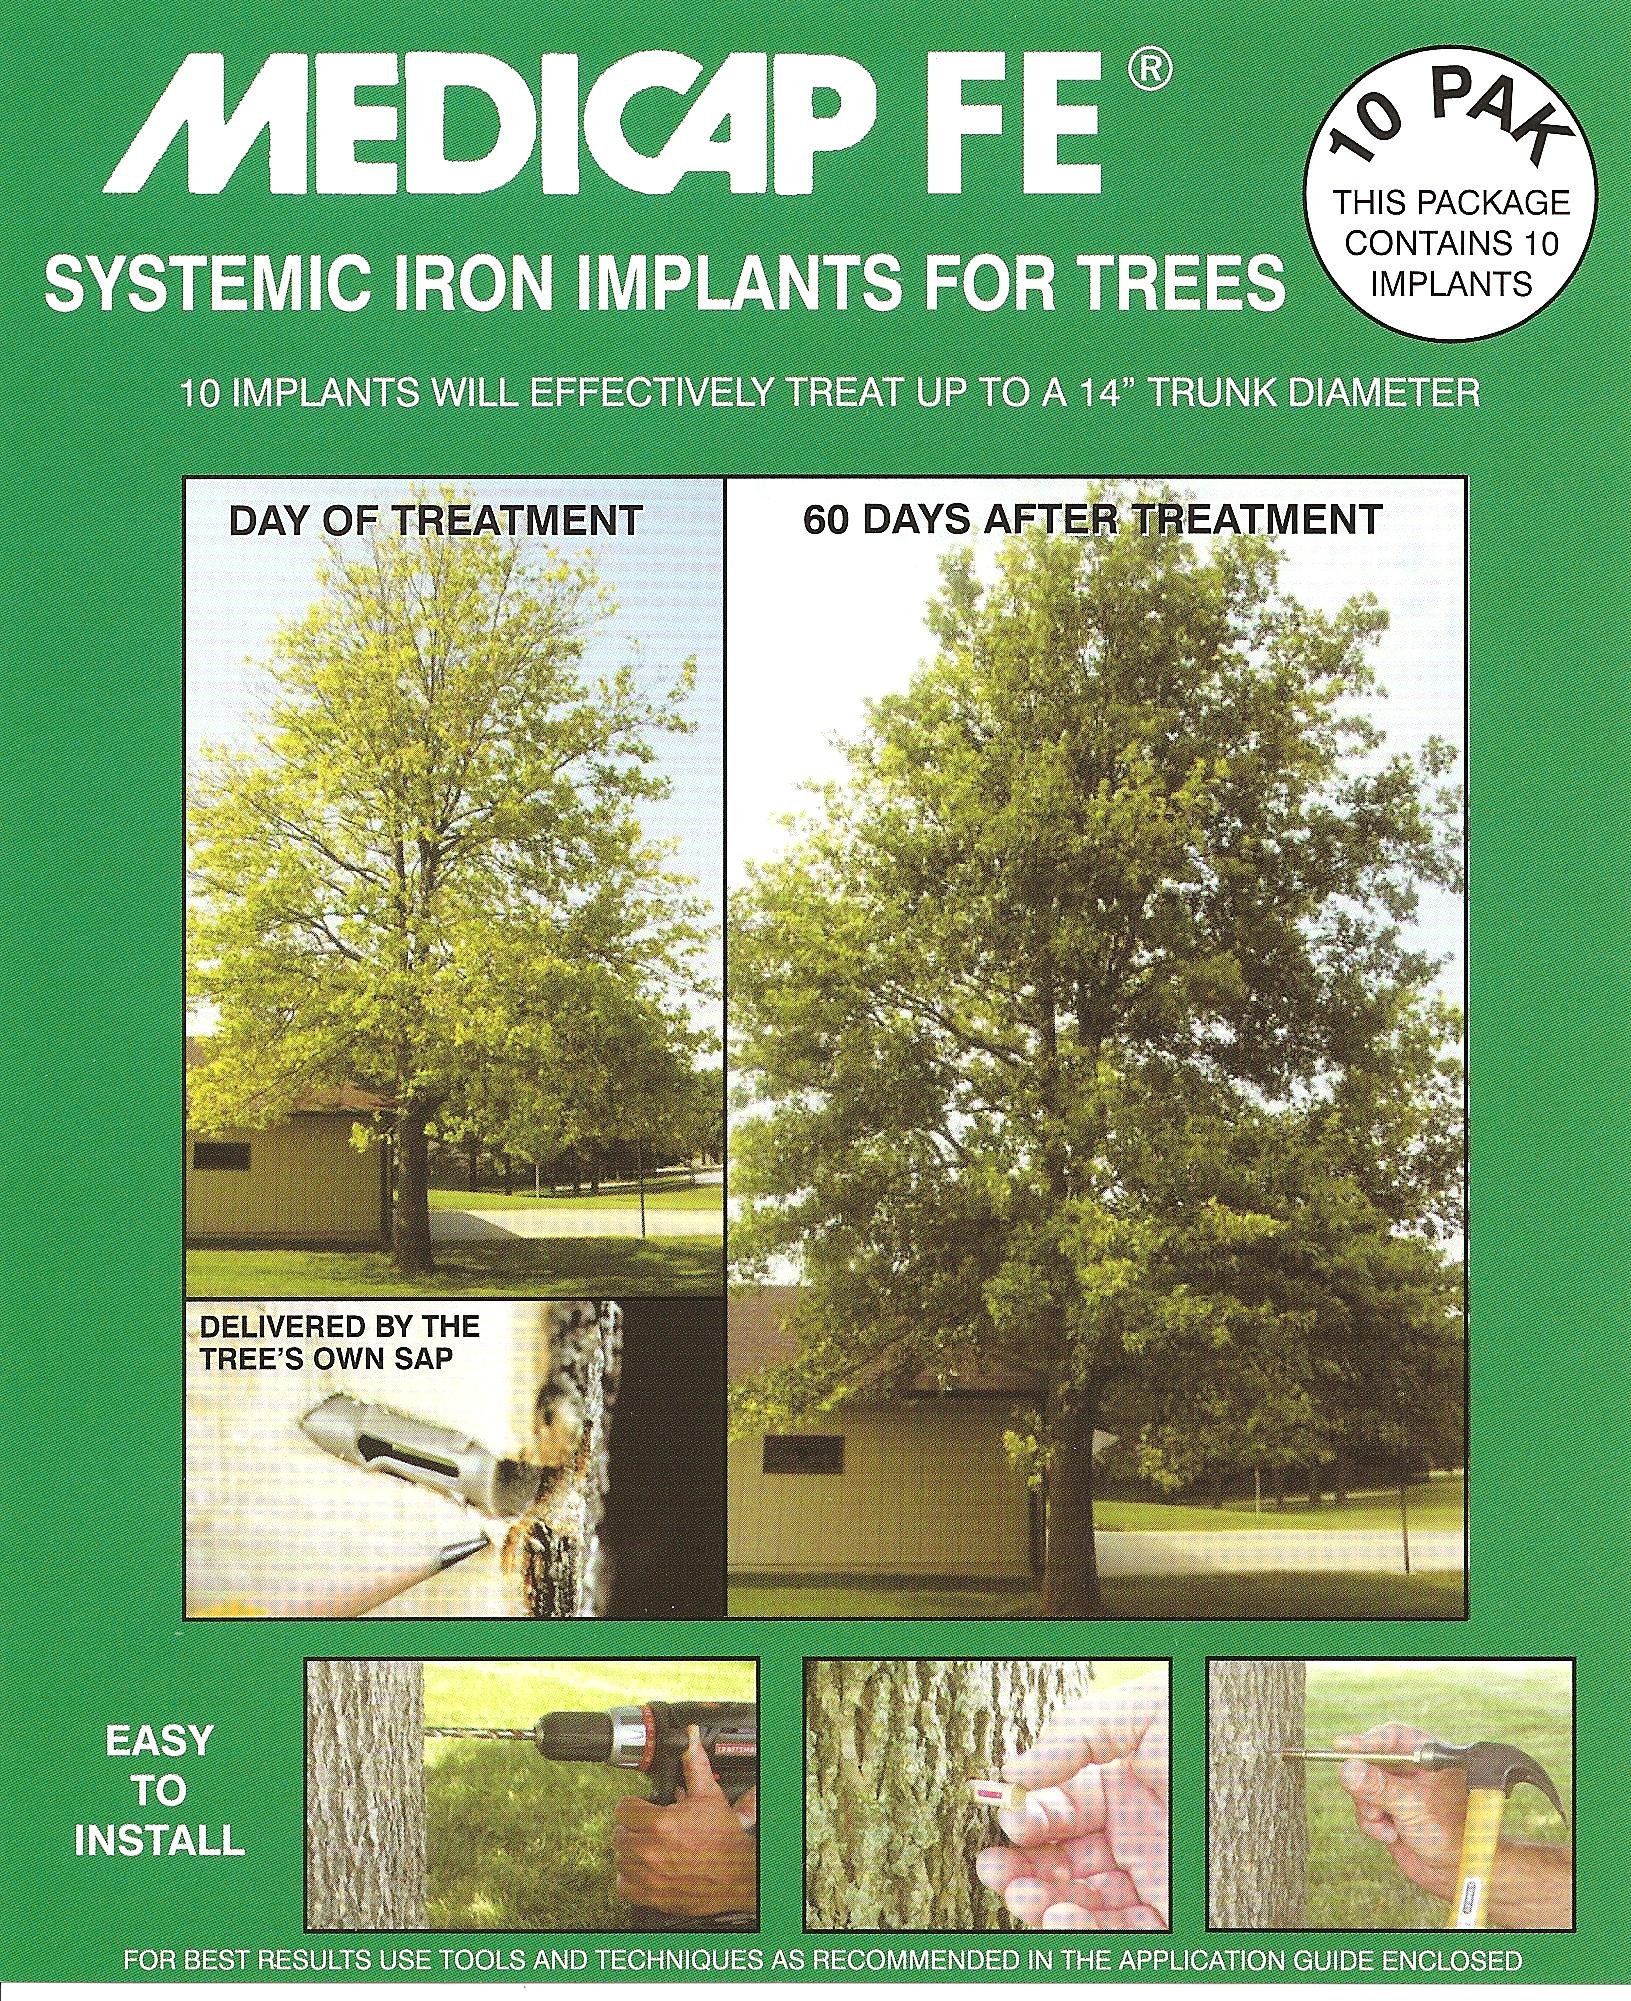 Medicap FE FE1210 Systemic Iron Tree Implant, Pack of 10